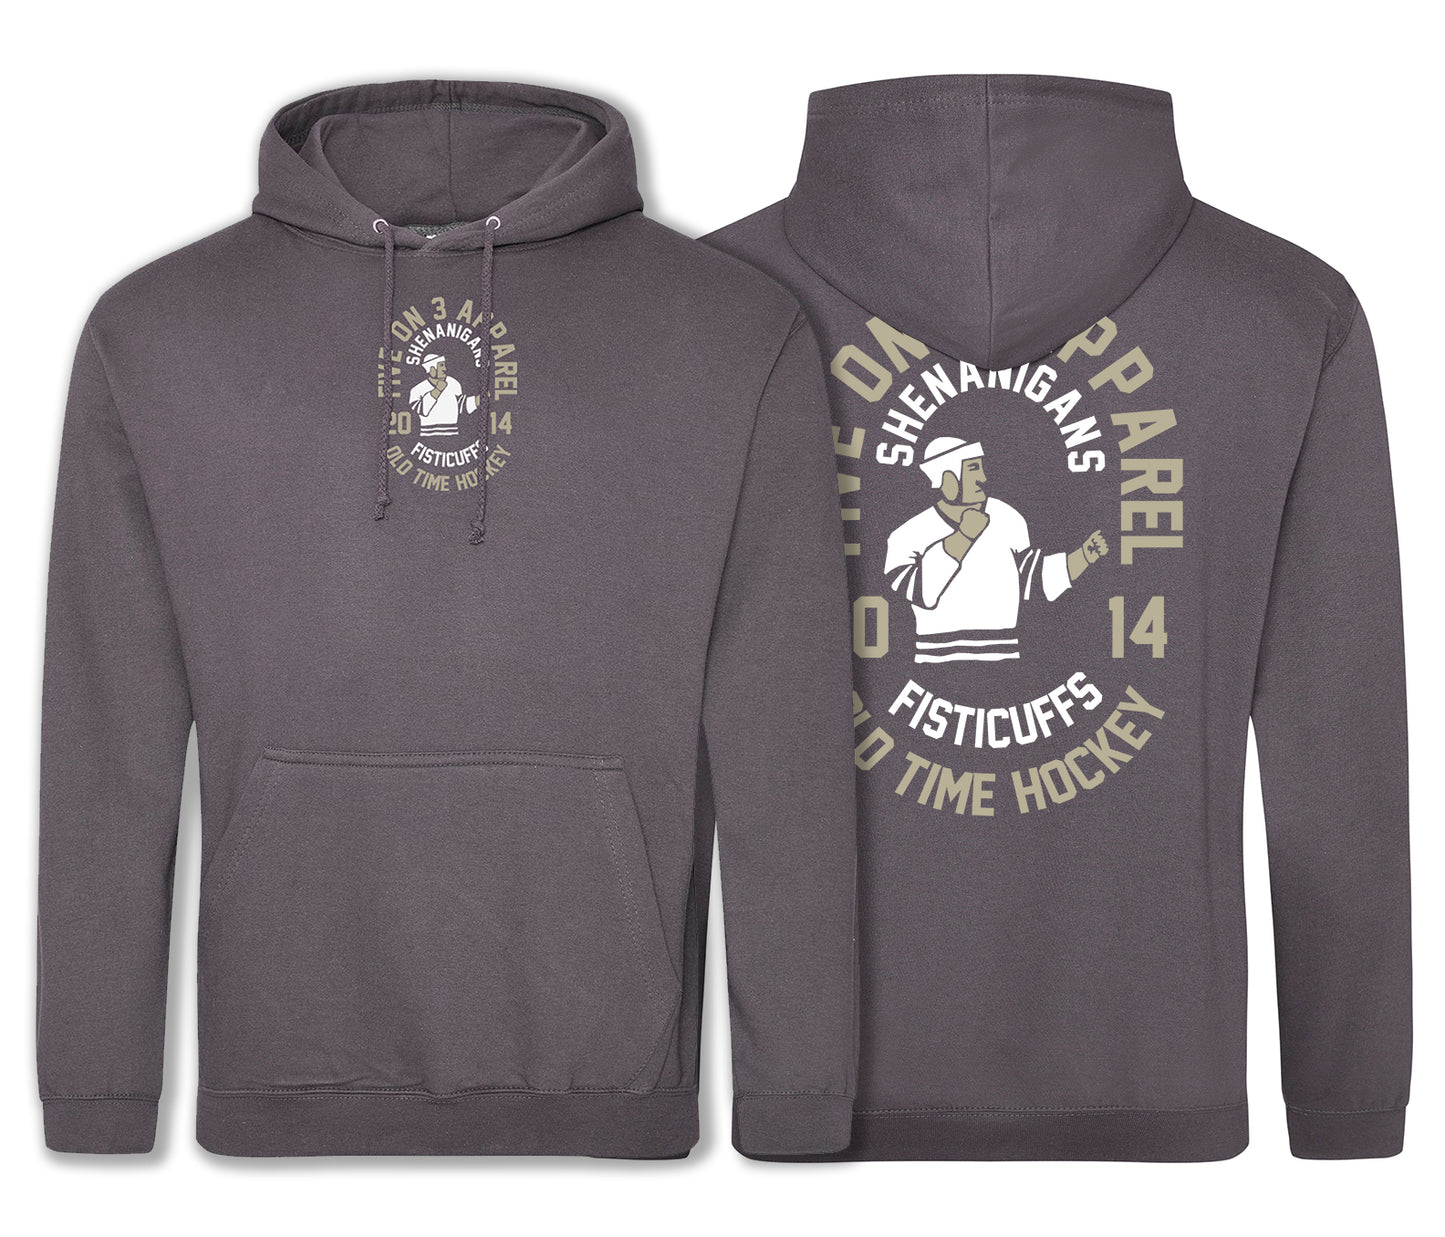 Shenanigans and Fisticuffs Hoody